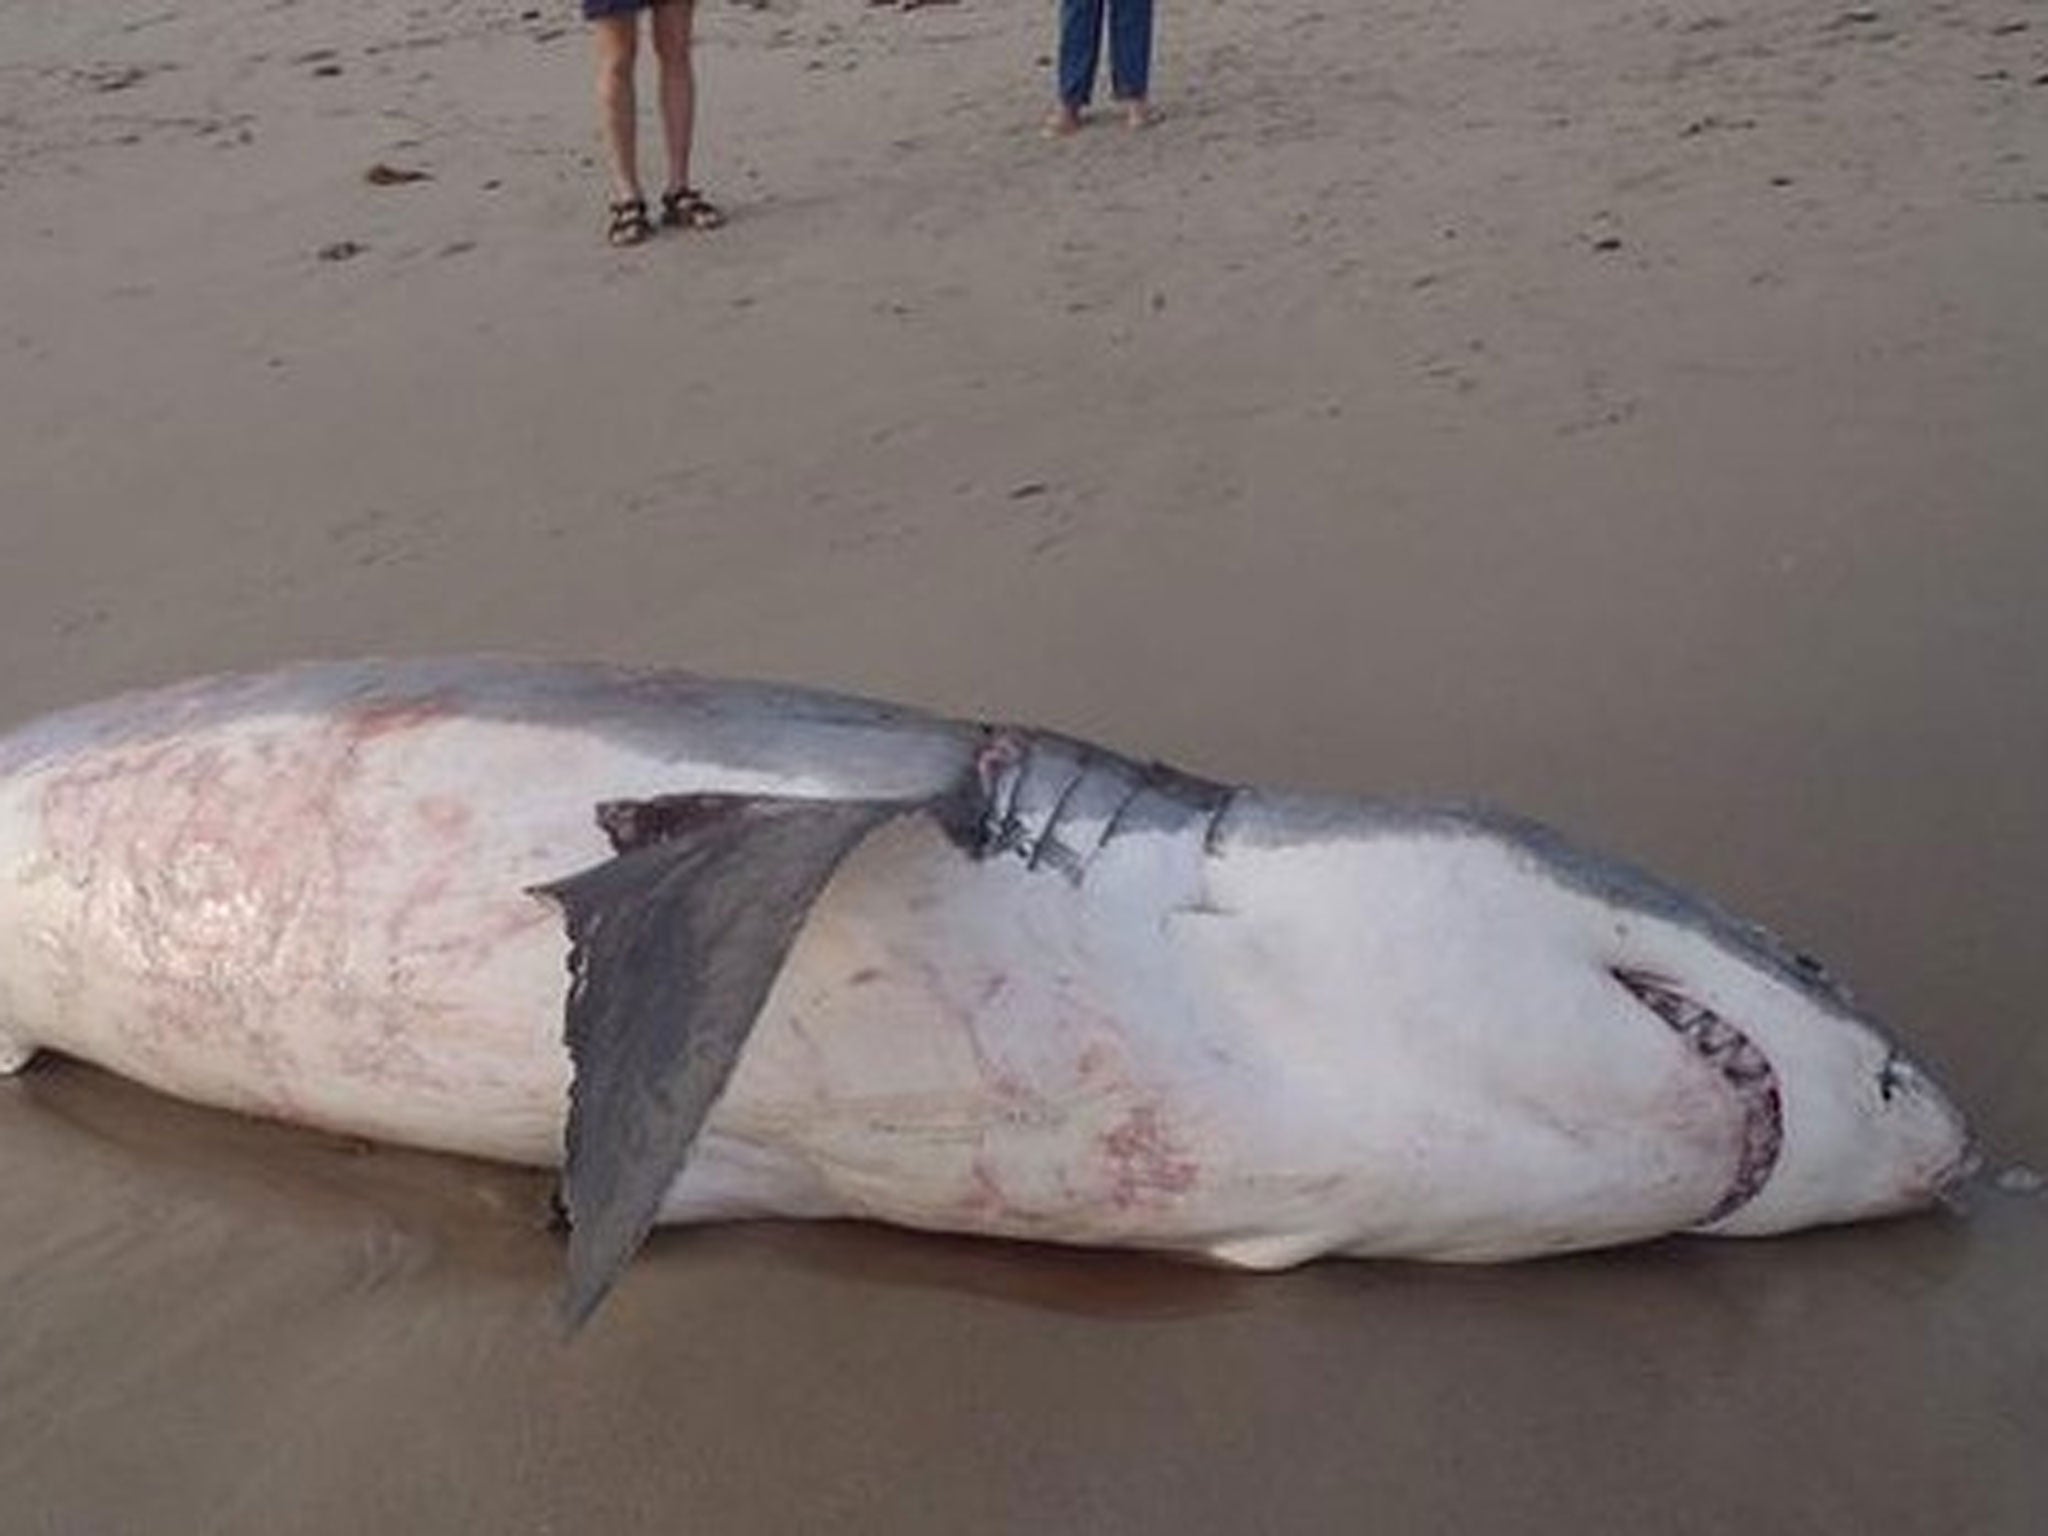 Experts said this great white shark most likely died from choking on a large sea lion that was found stuck in its throat